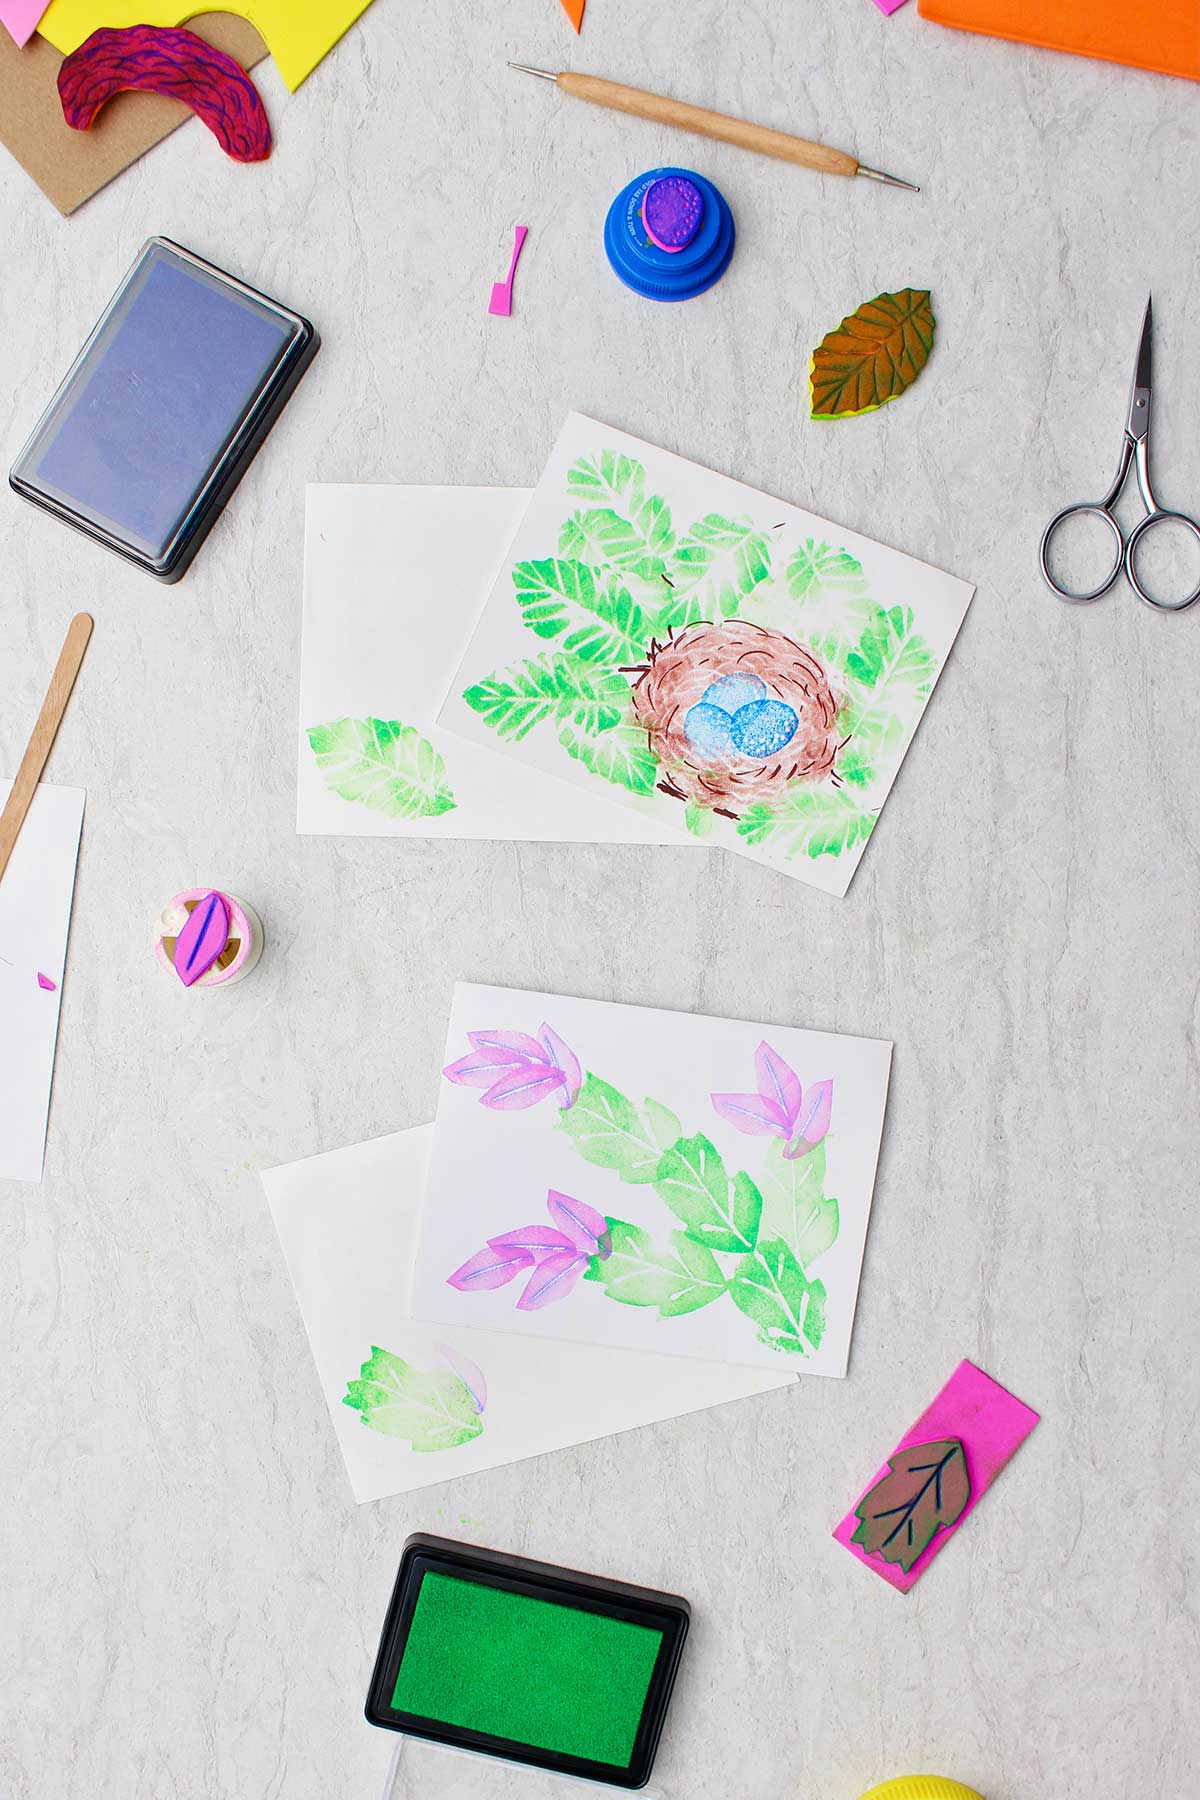 Completed botanical prints made with craft foam stamps with supplies near by.